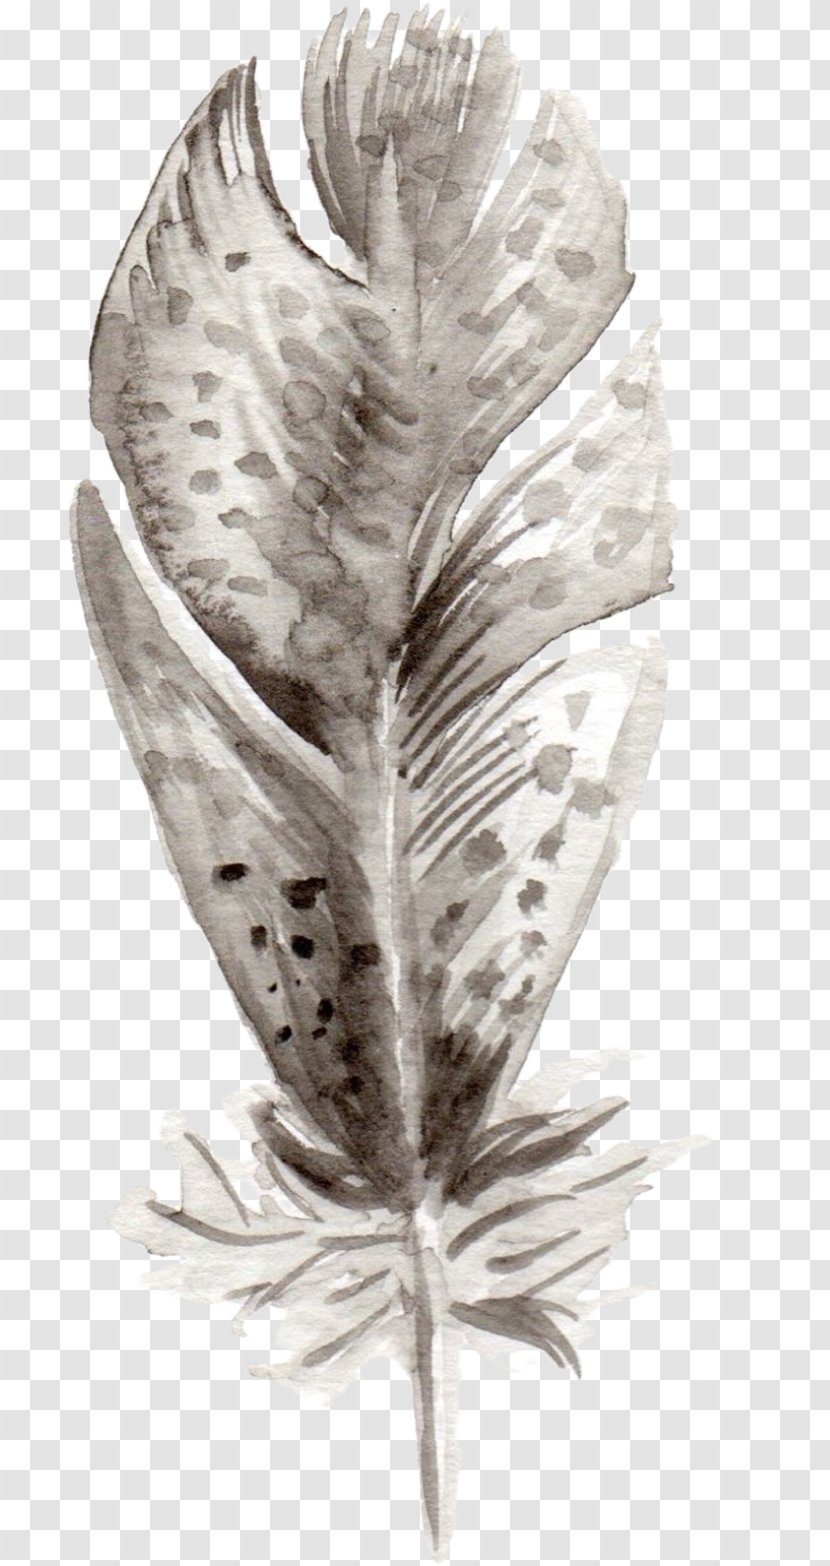 Monochrome Photography Feather Quill - Leaf - Feathers Transparent PNG